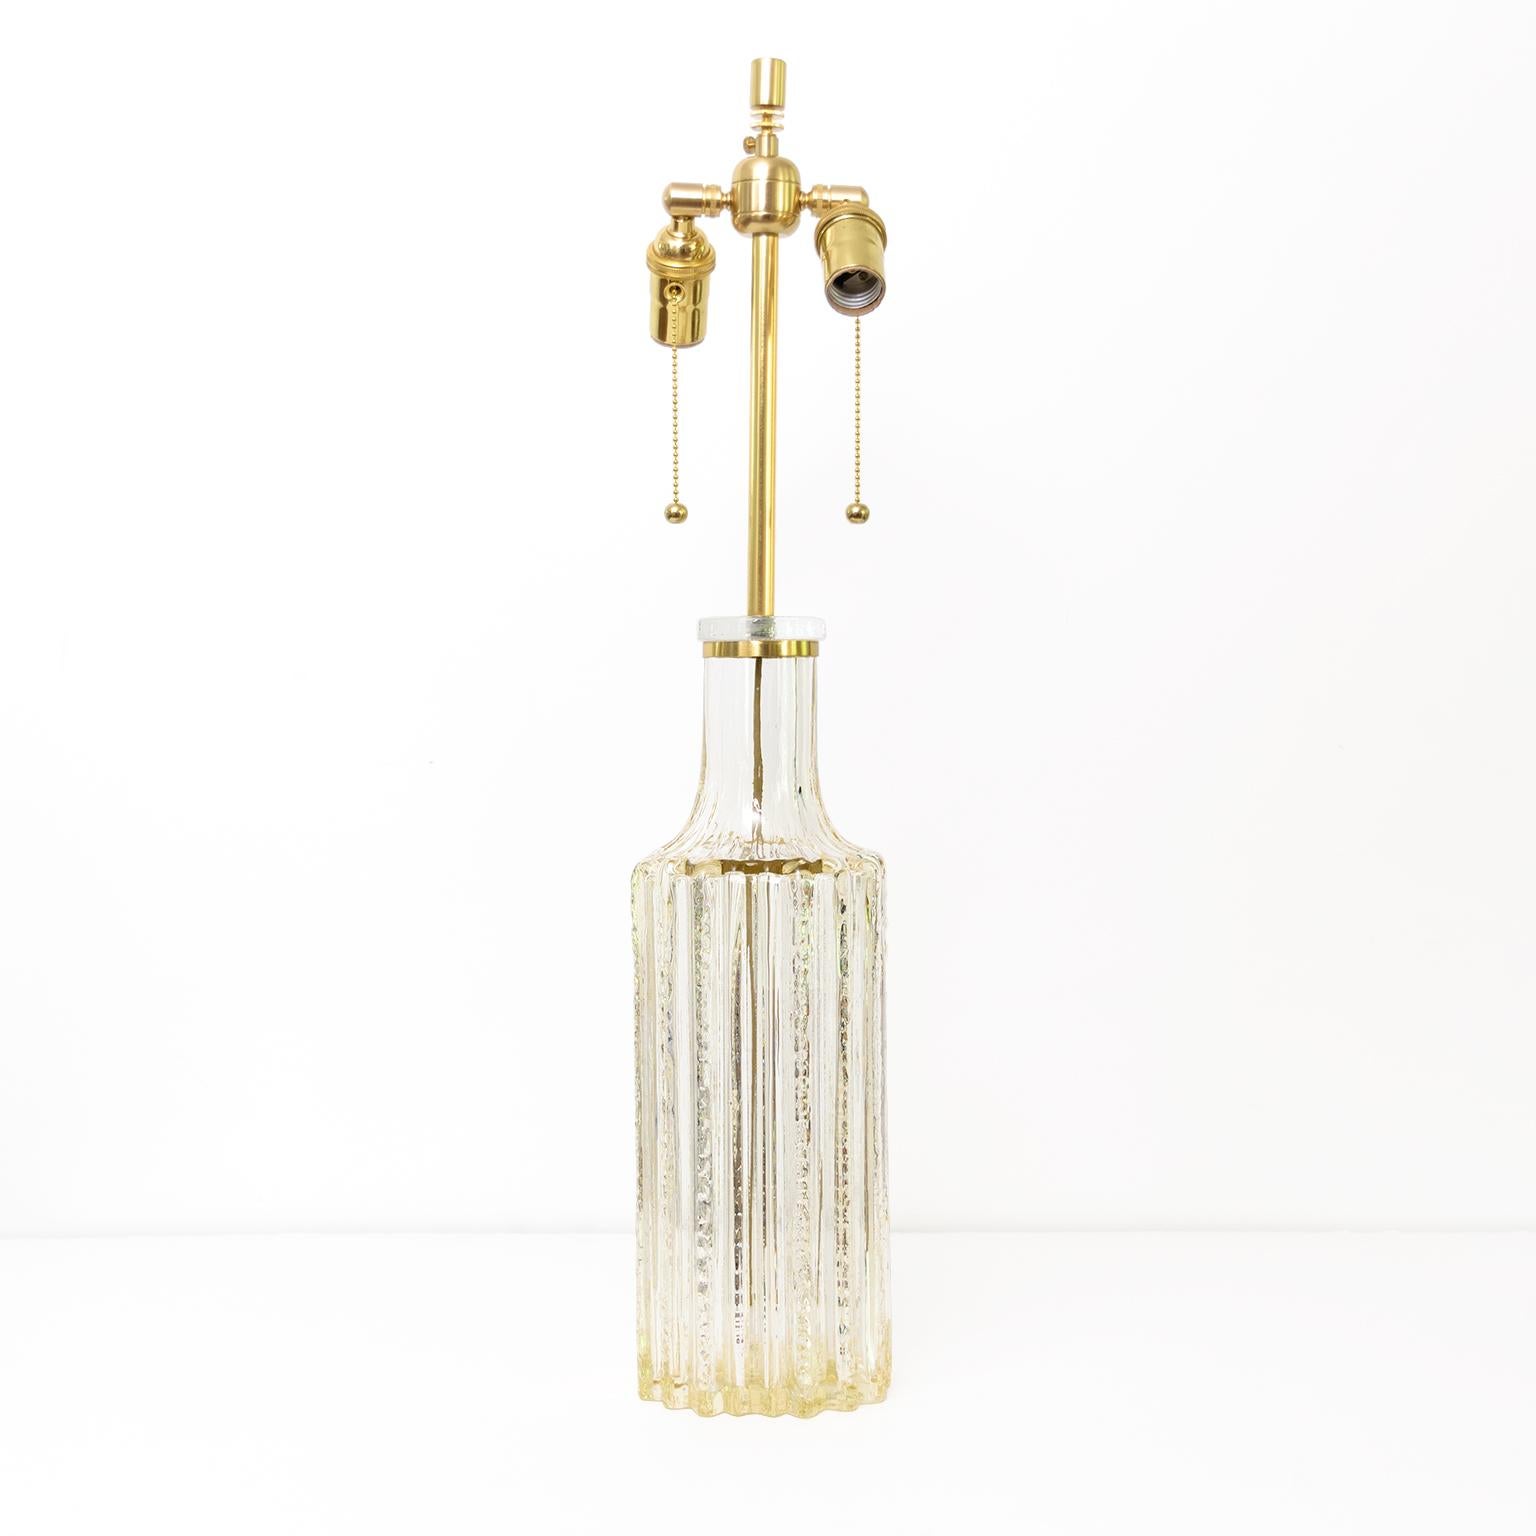 A tall highly textured Scandinavian Modern glass table lamp circa 1960’s with fluted channels in tinted clear glass. The lamp has been newly wired for use in the USA with all brass hardware including a double socket cluster. A polished brass